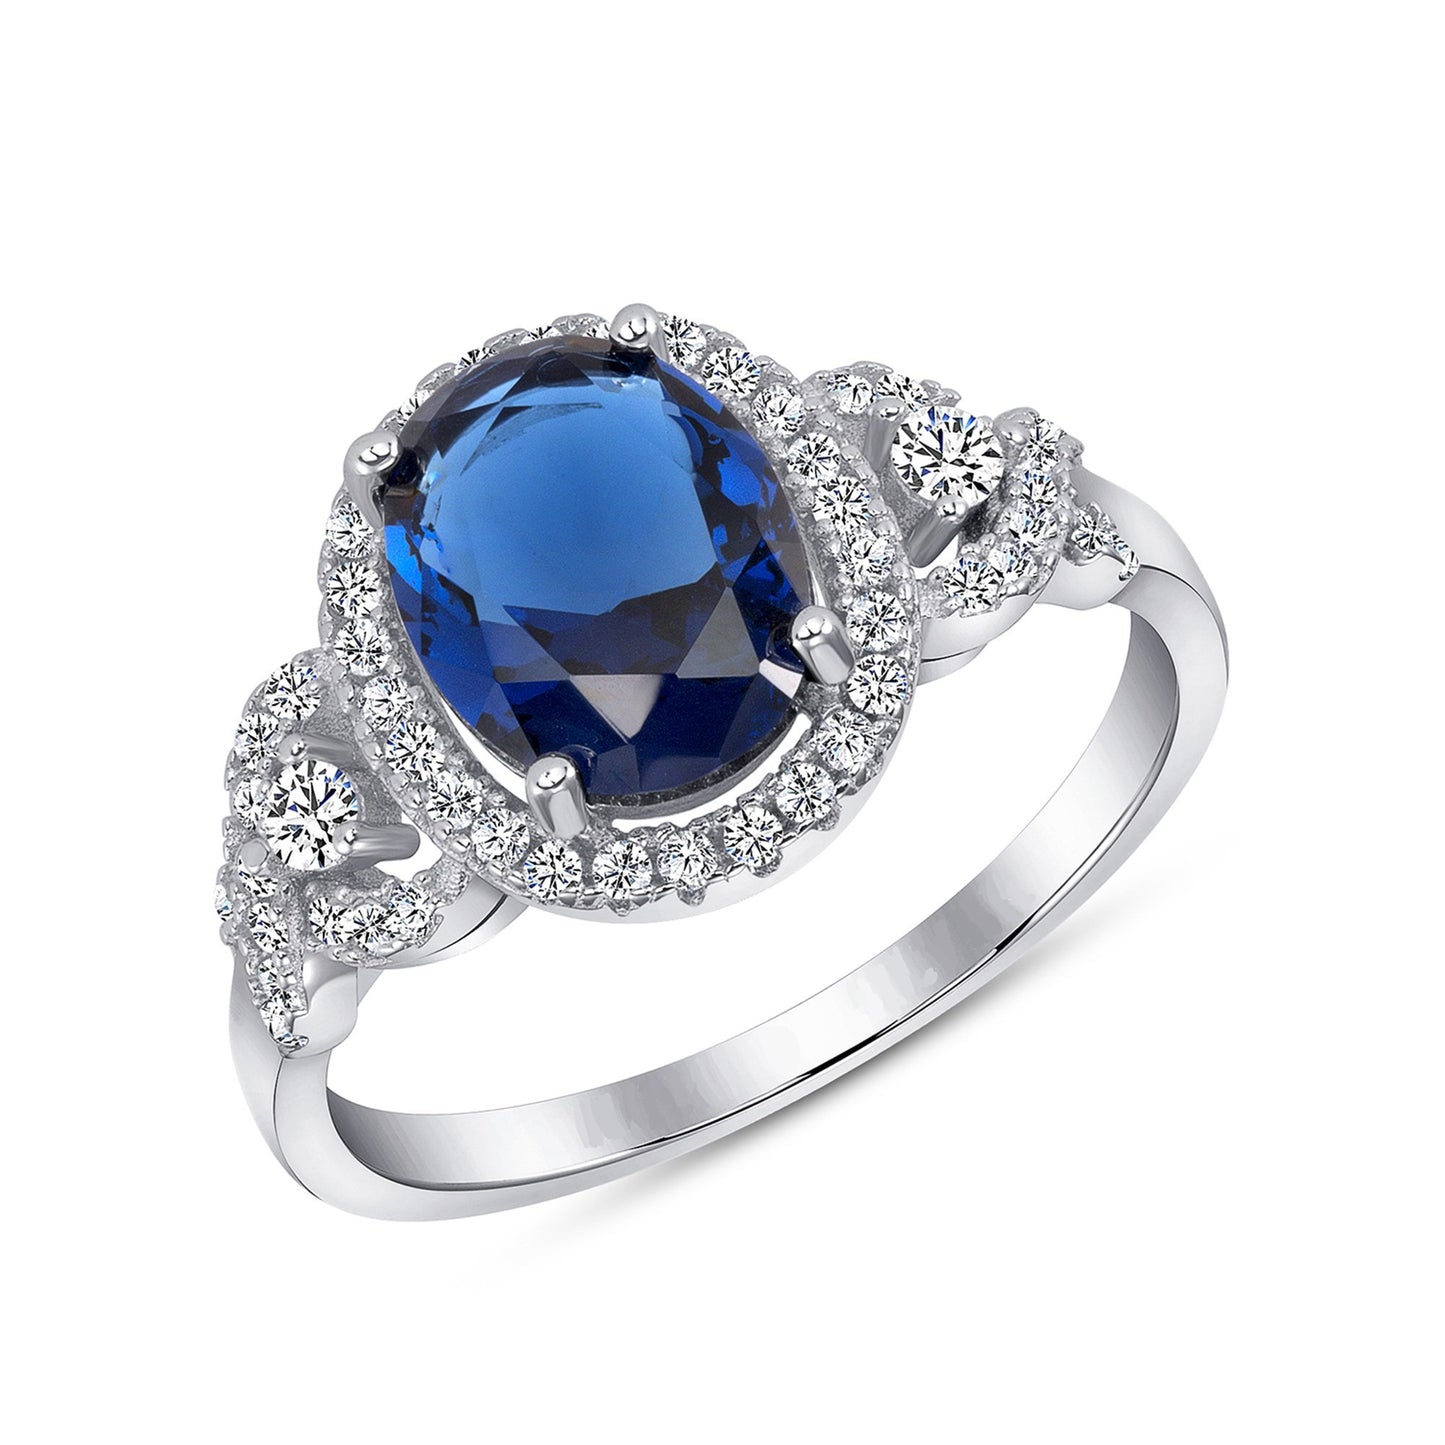 GR8573BLU. Silver 925 Rhodium Plated Halo Style Blue Sapphire Cubic Zirconia Ring